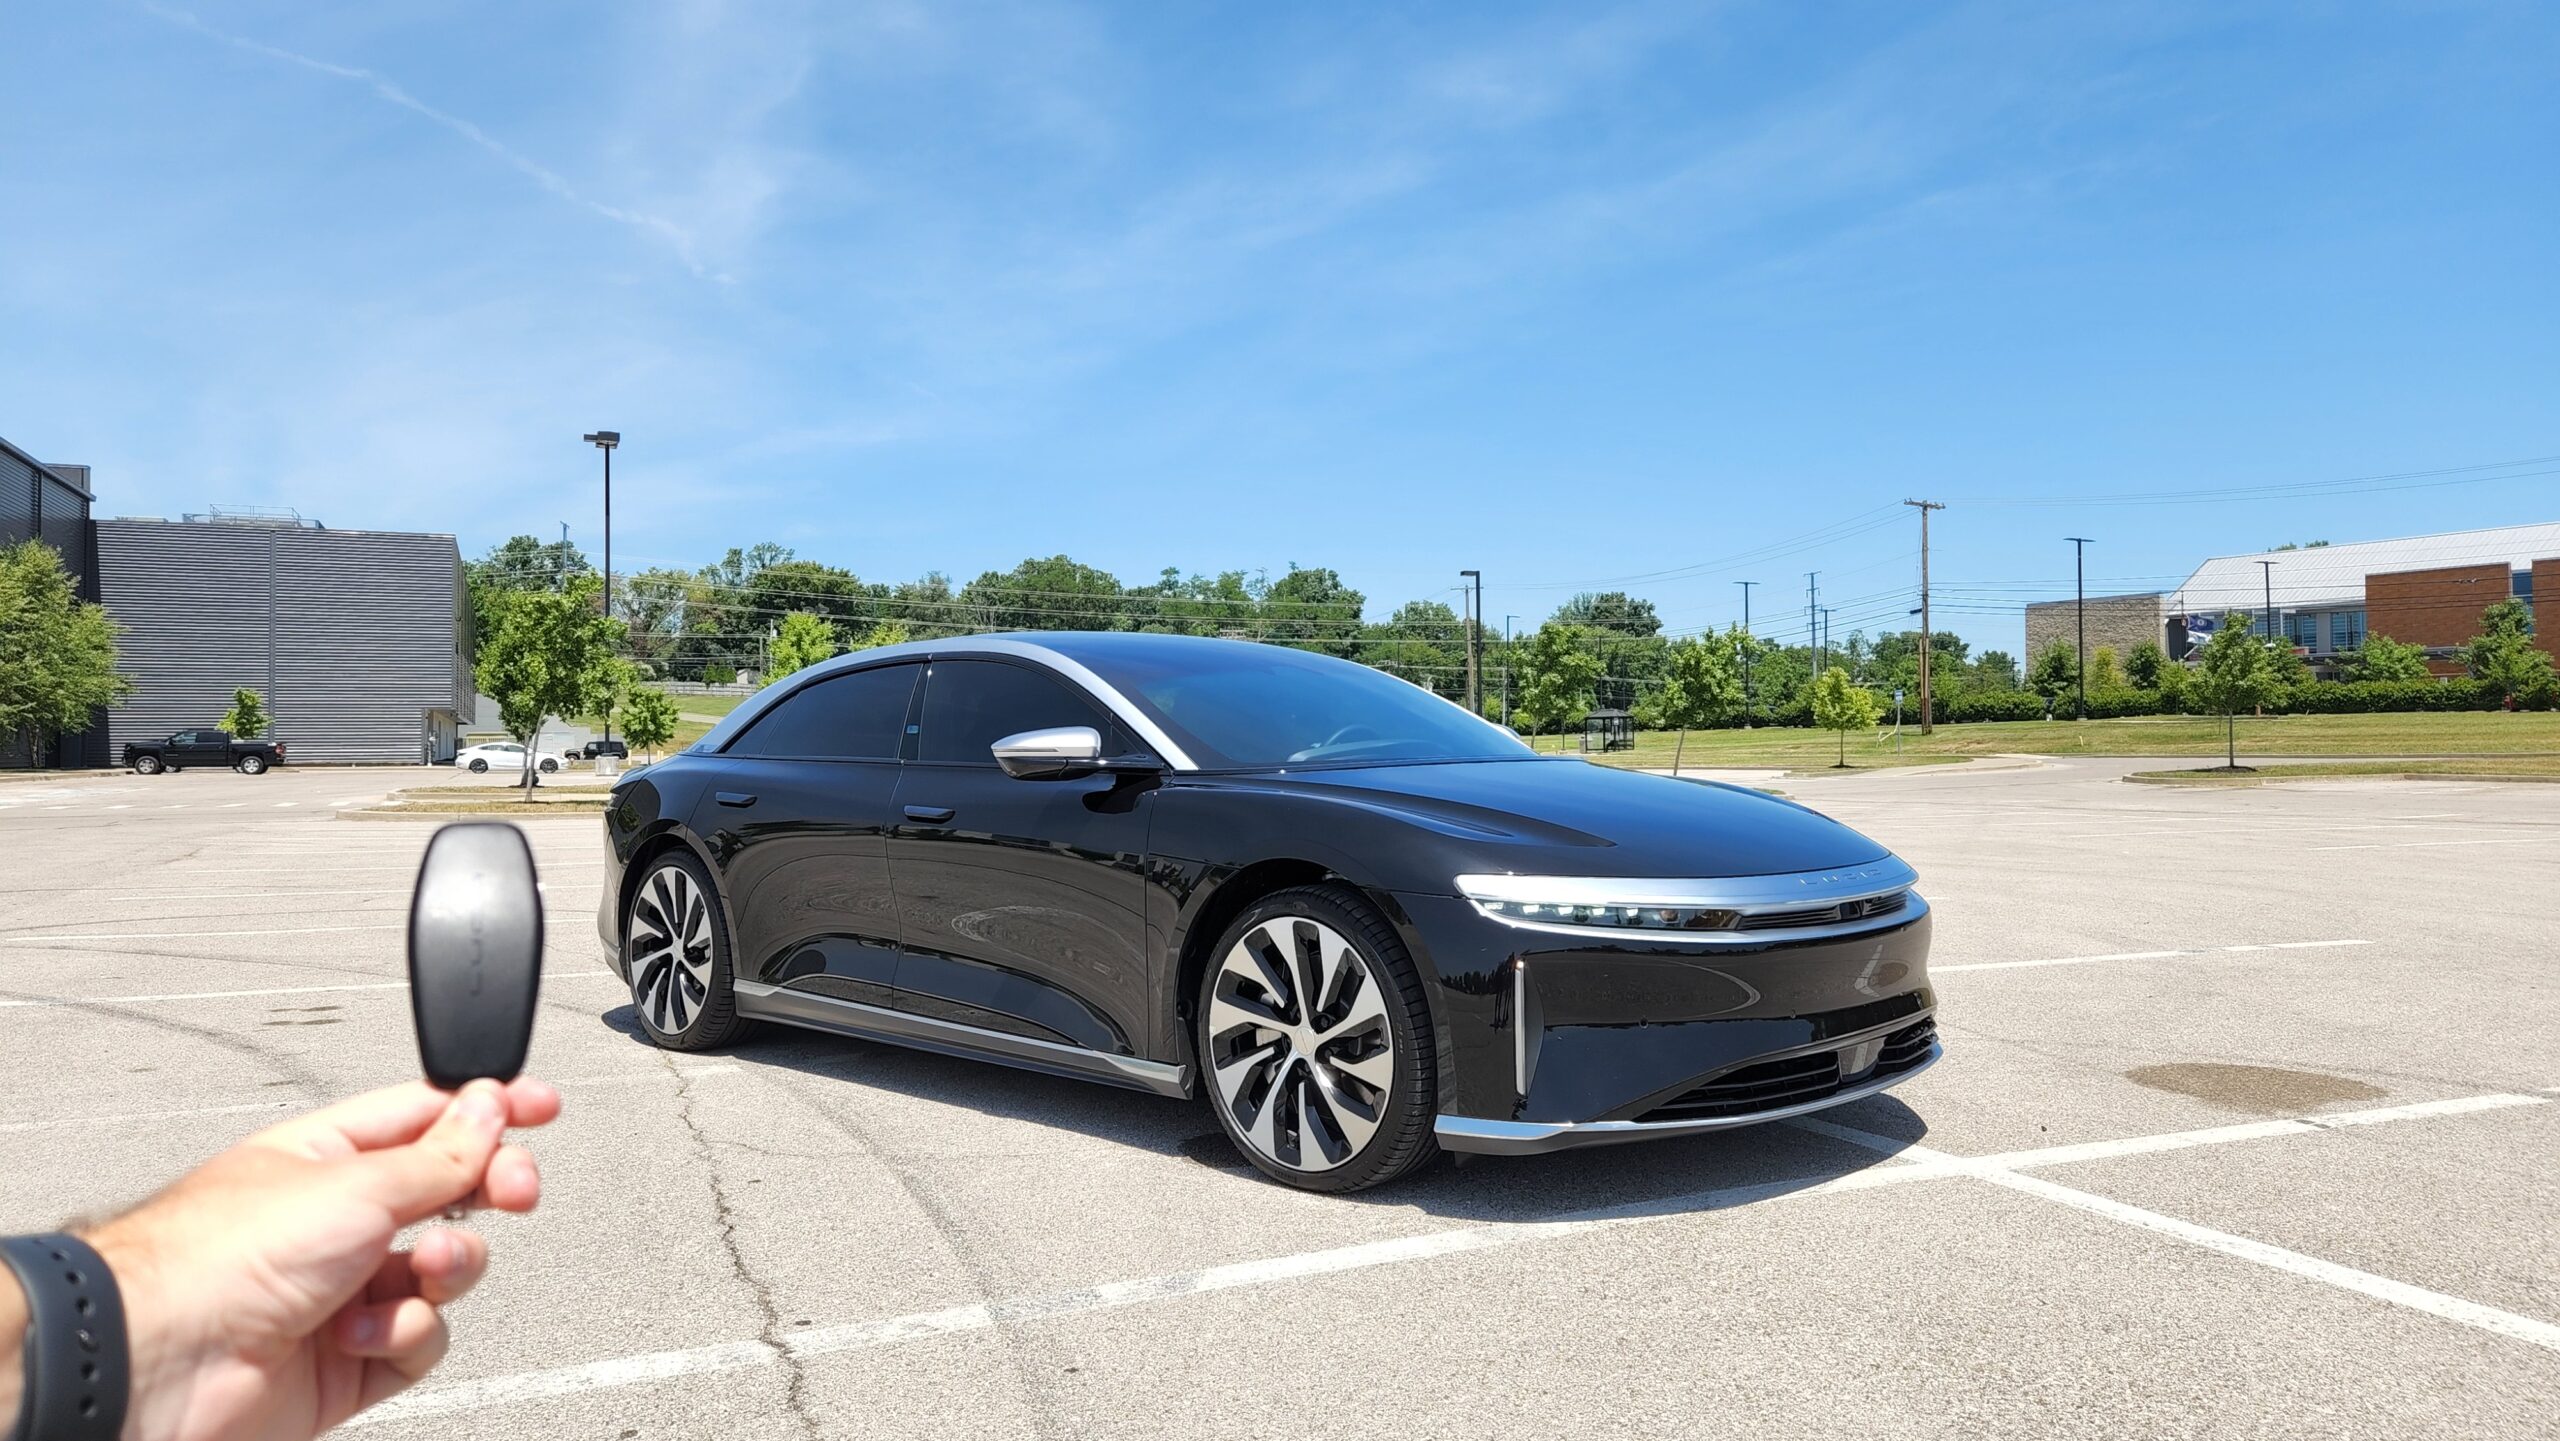 2022 Lucid Air Grand Touring shown in Black. How do you like the design?